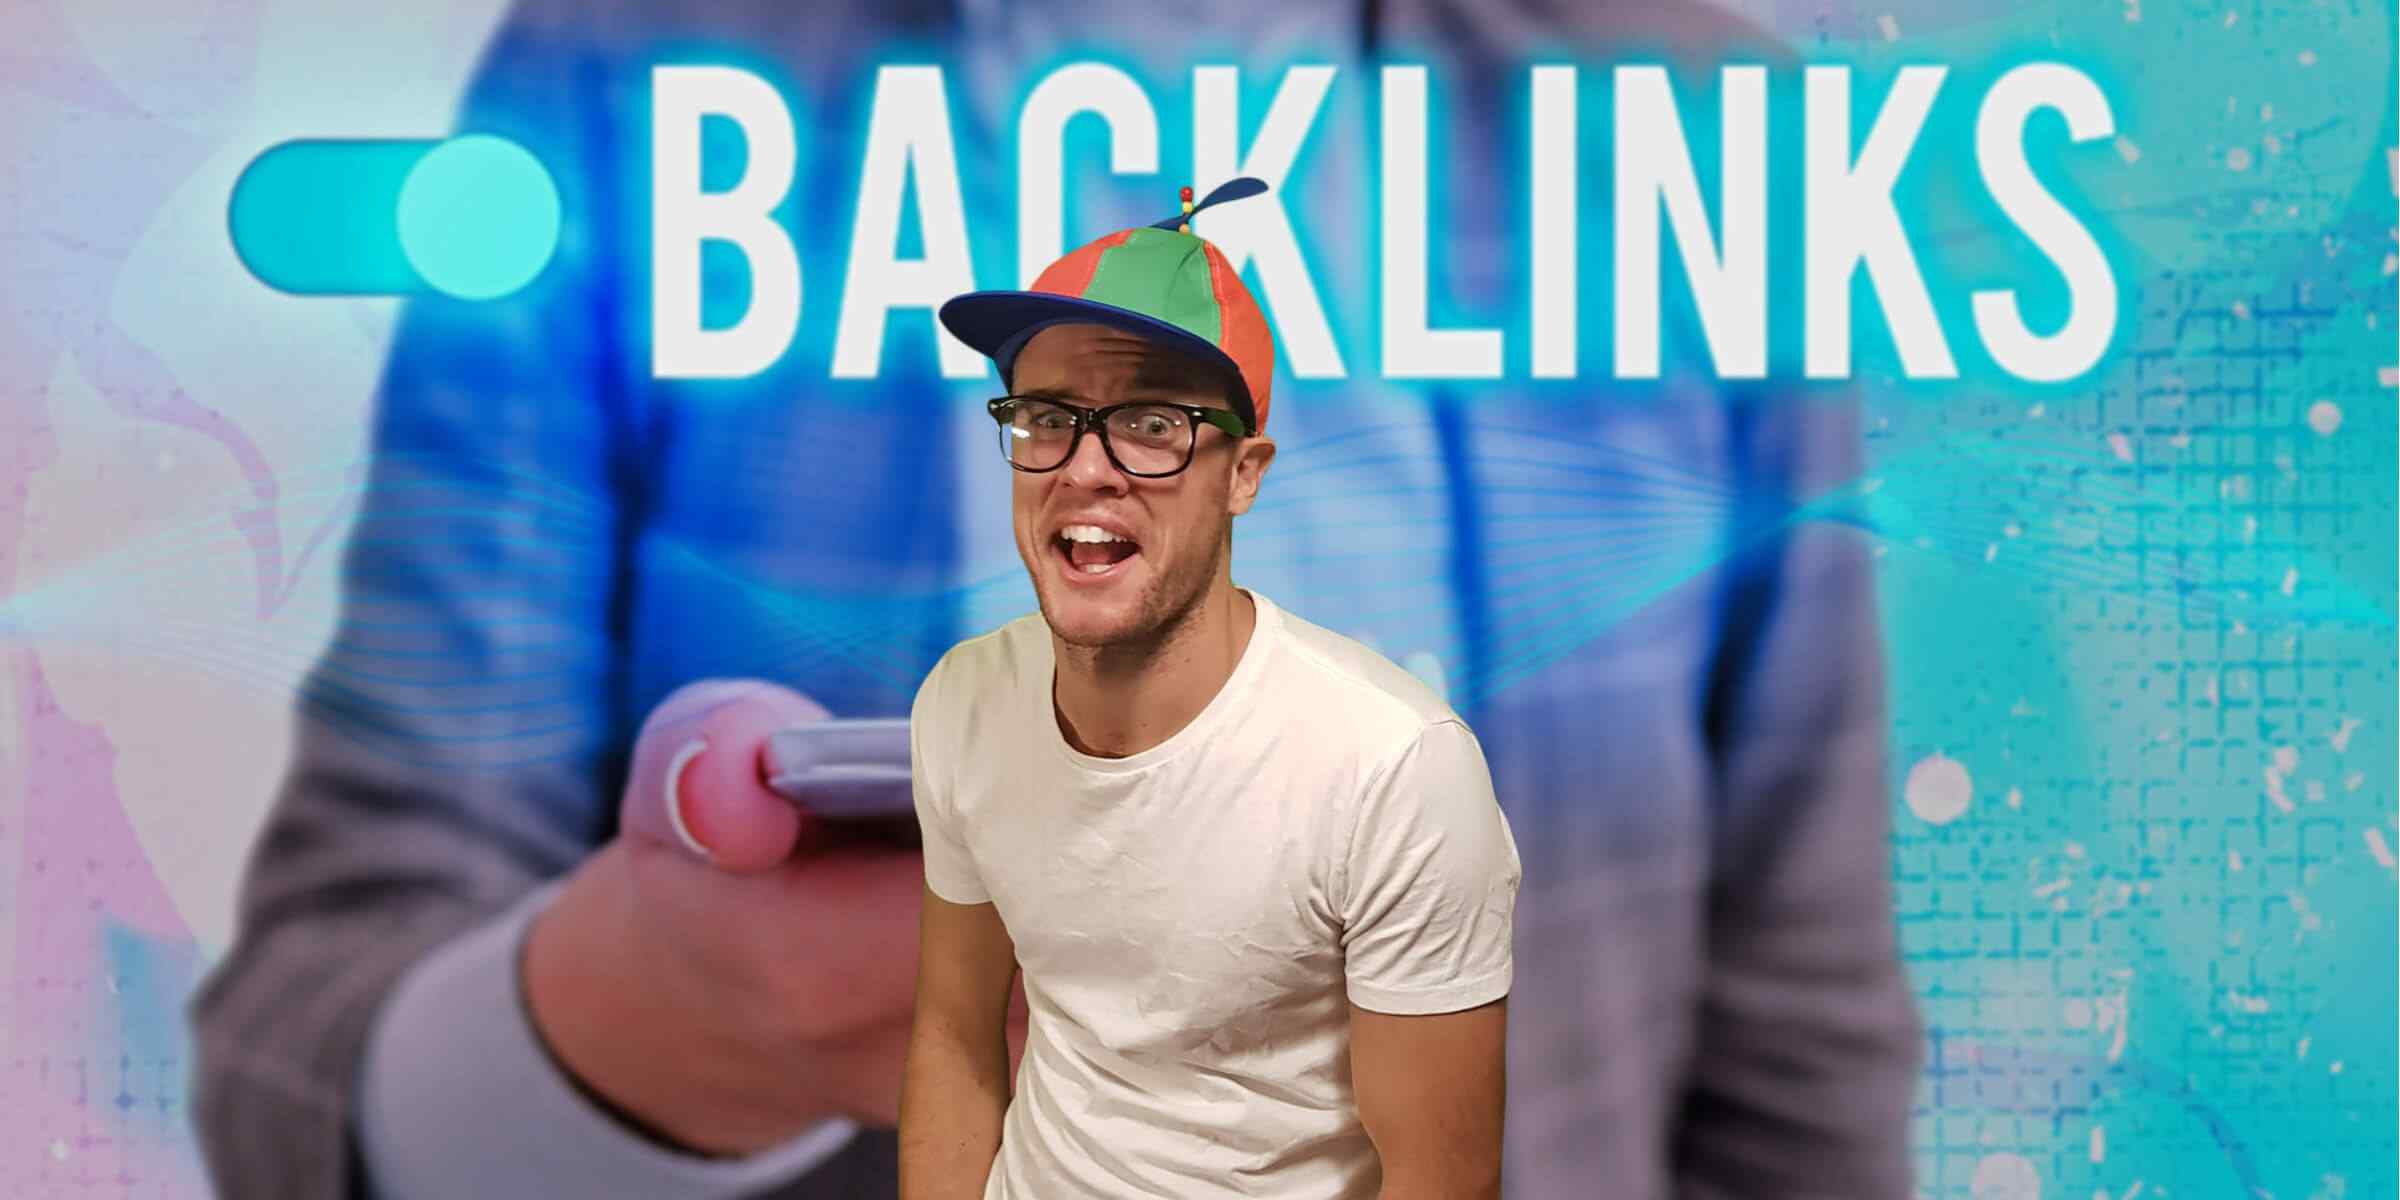 Guide to Backlinking and Why It’s Important for Your Website